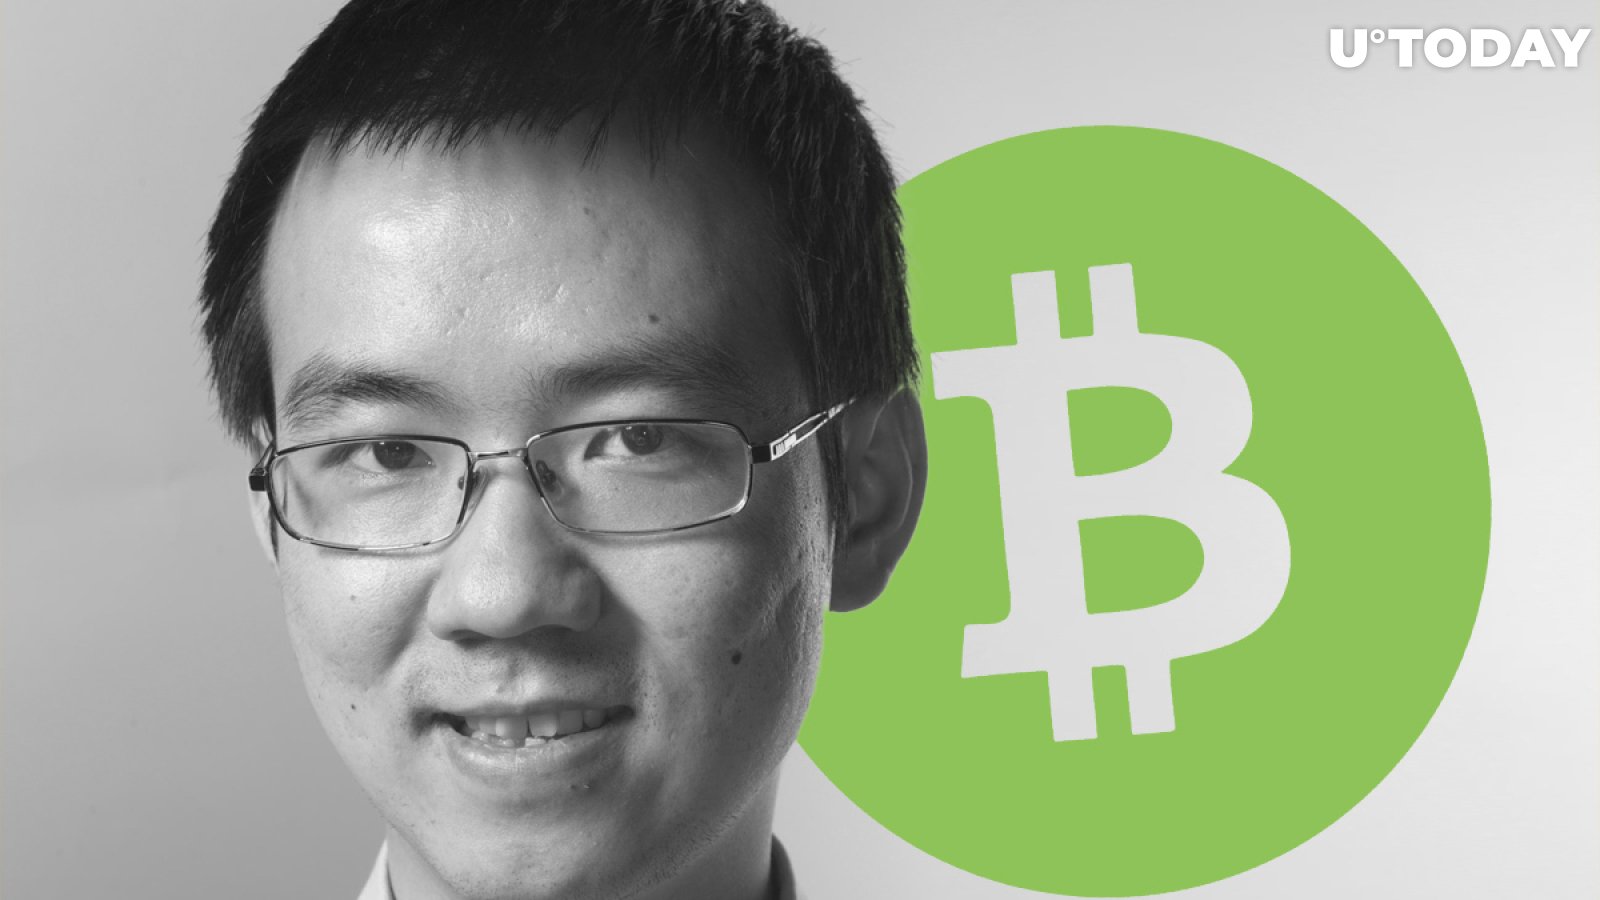 First-Ever Bitcoin Cash (BCH) Option to Be Launched by Bitmain Founder Jihan Wu